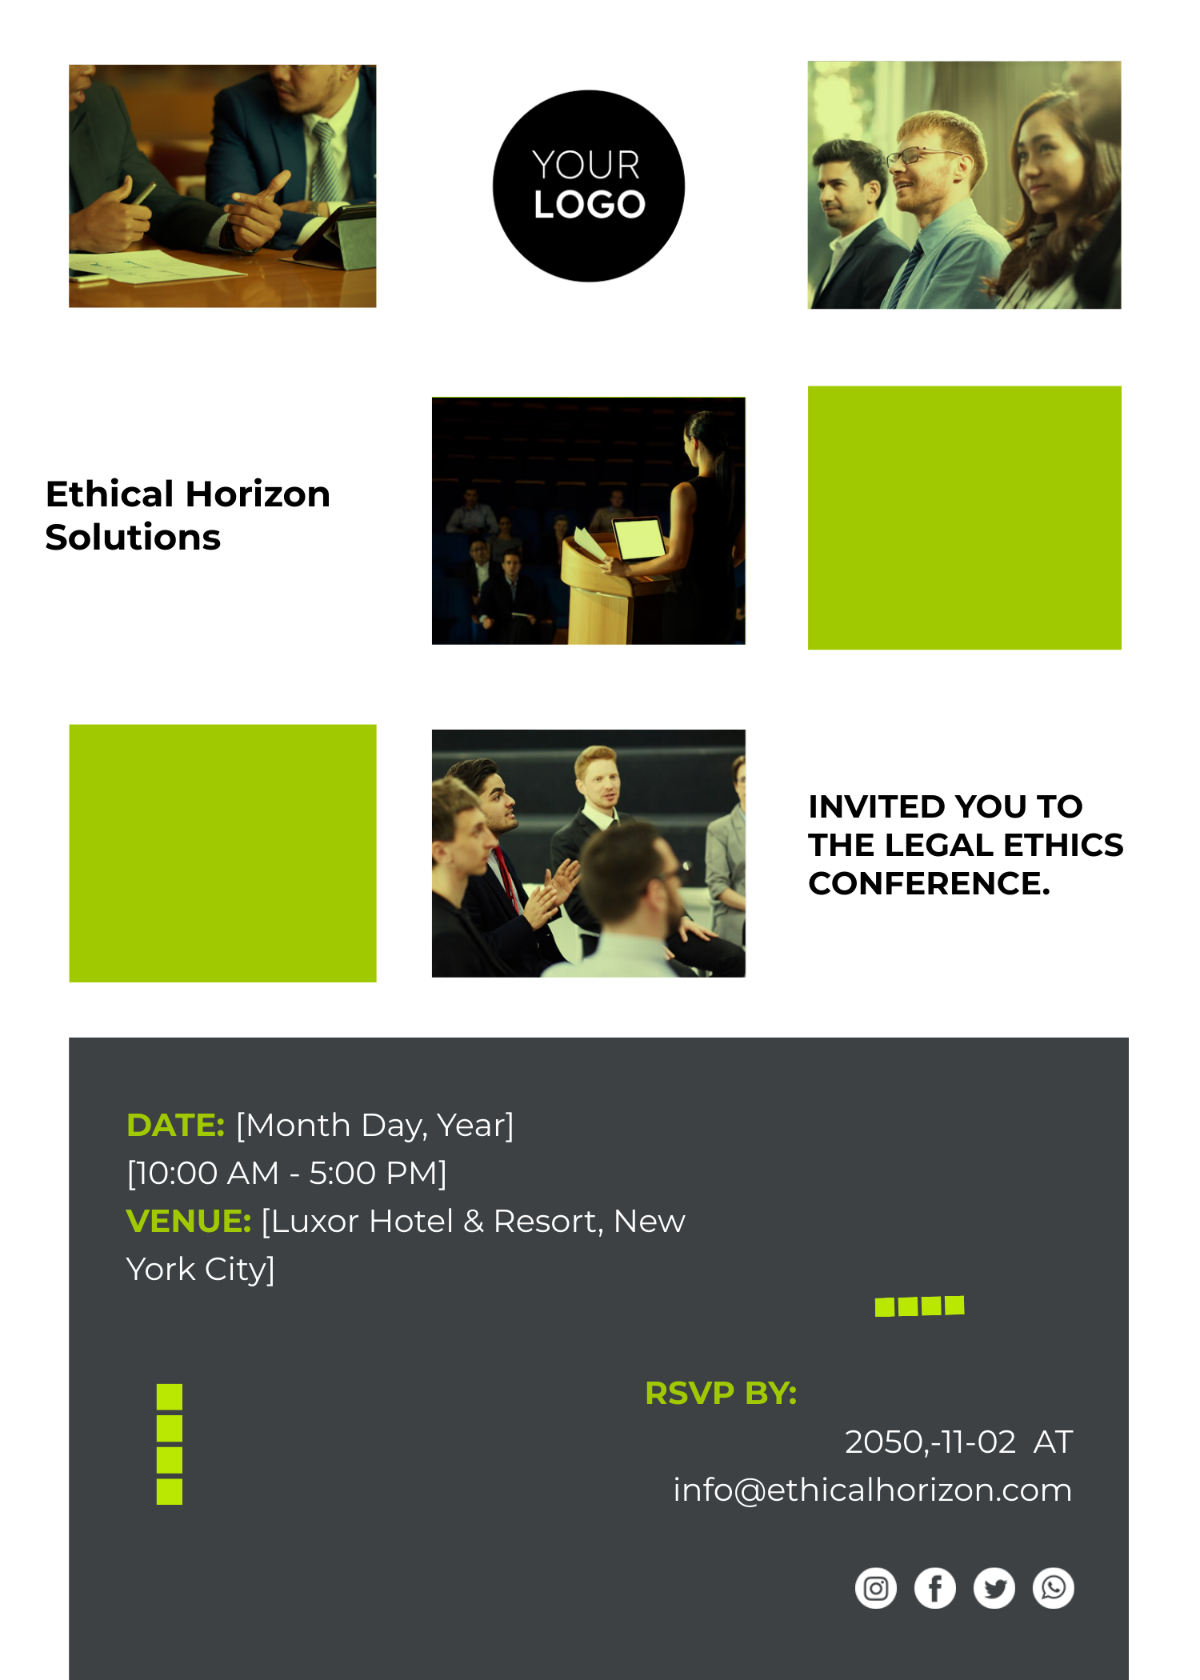 Legal Ethics Conference Invitation Card